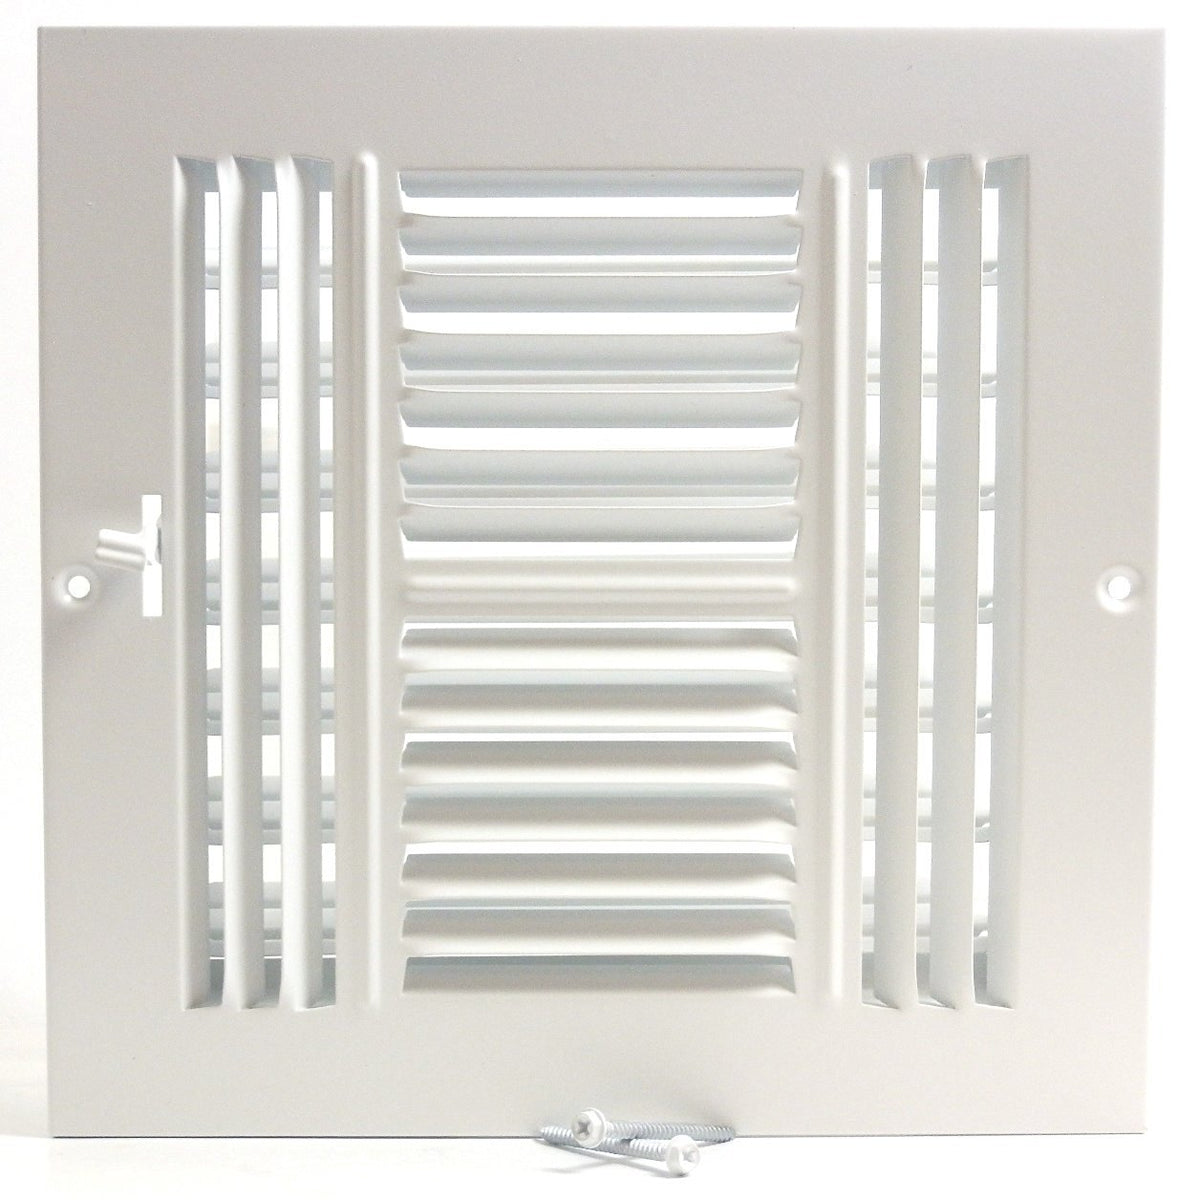 6&quot; X 6&quot; 4-Way AIR SUPPLY GRILLE - DUCT COVER &amp; DIFFUSER - Flat Stamped Face